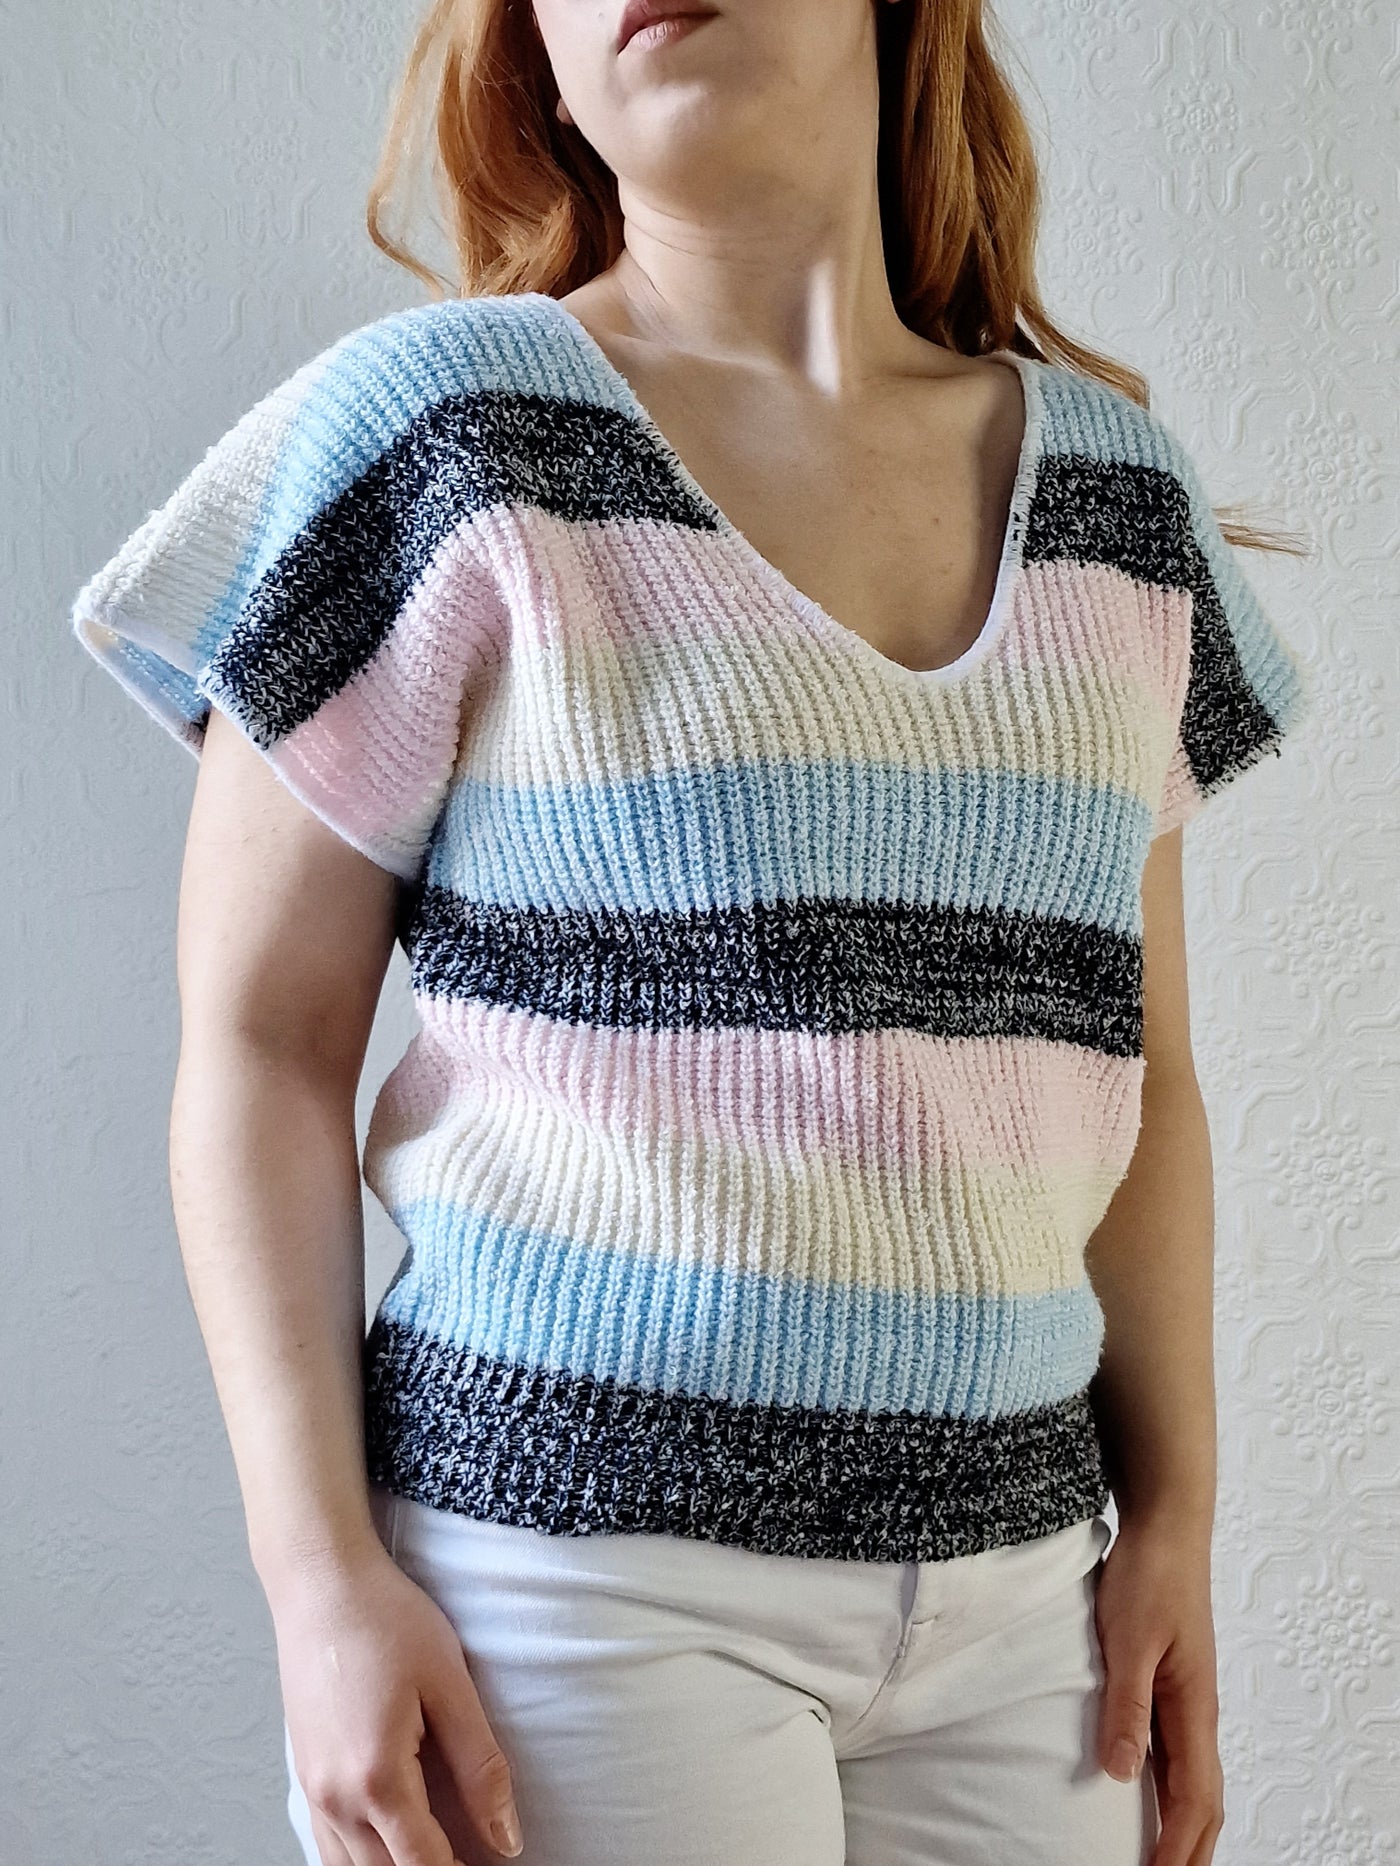 Vintage 80s Striped Pastel V-Neck Knitted Jumper Top with Short Sleeves - M